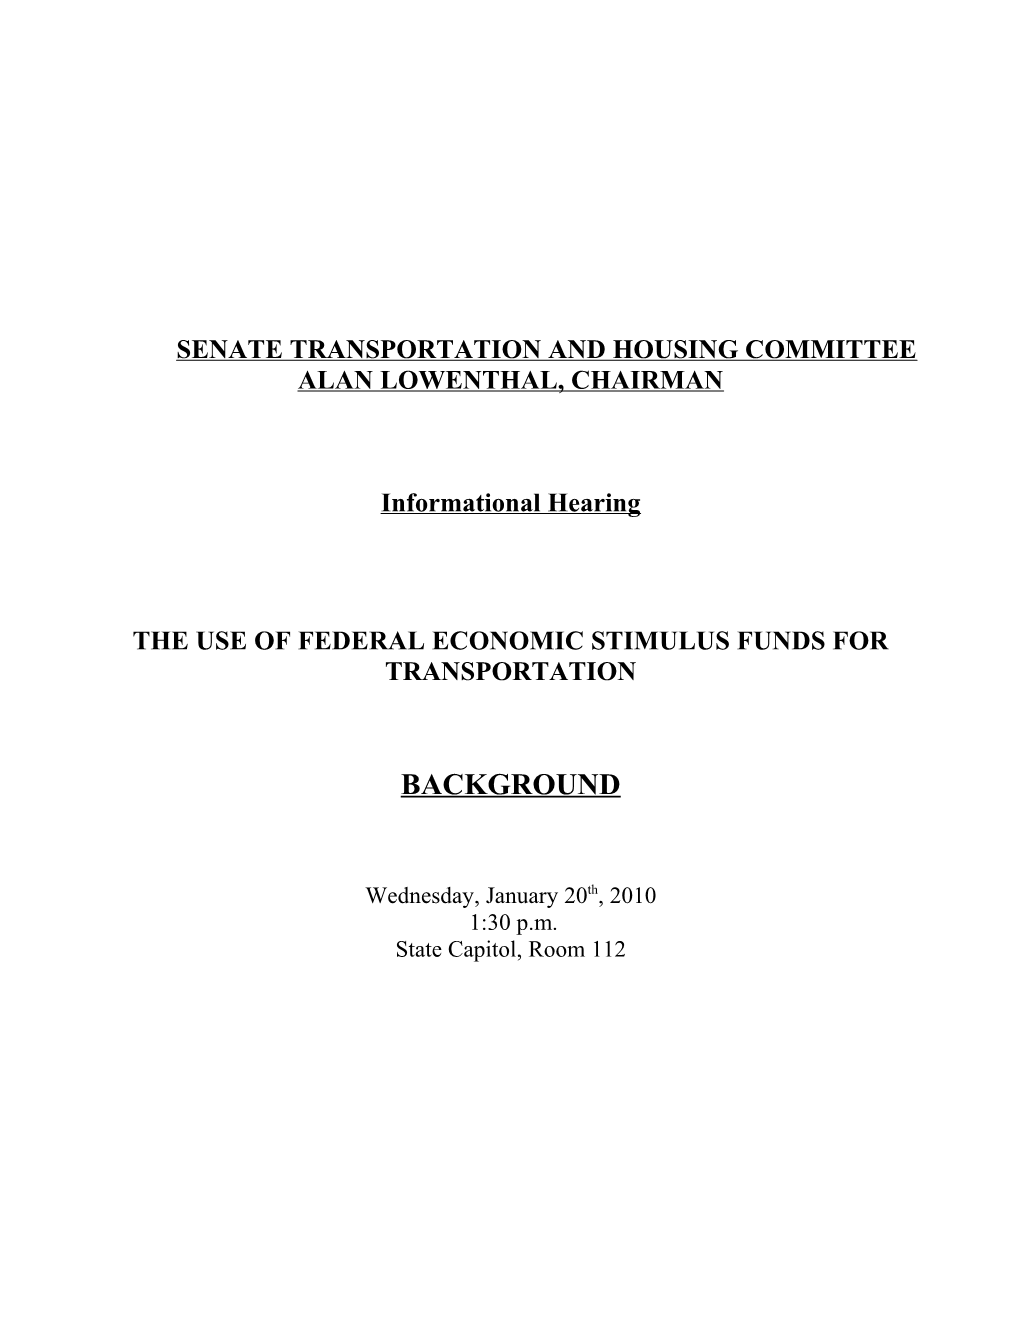 The Use of Federal Economic Stimulus Funds for Transportation